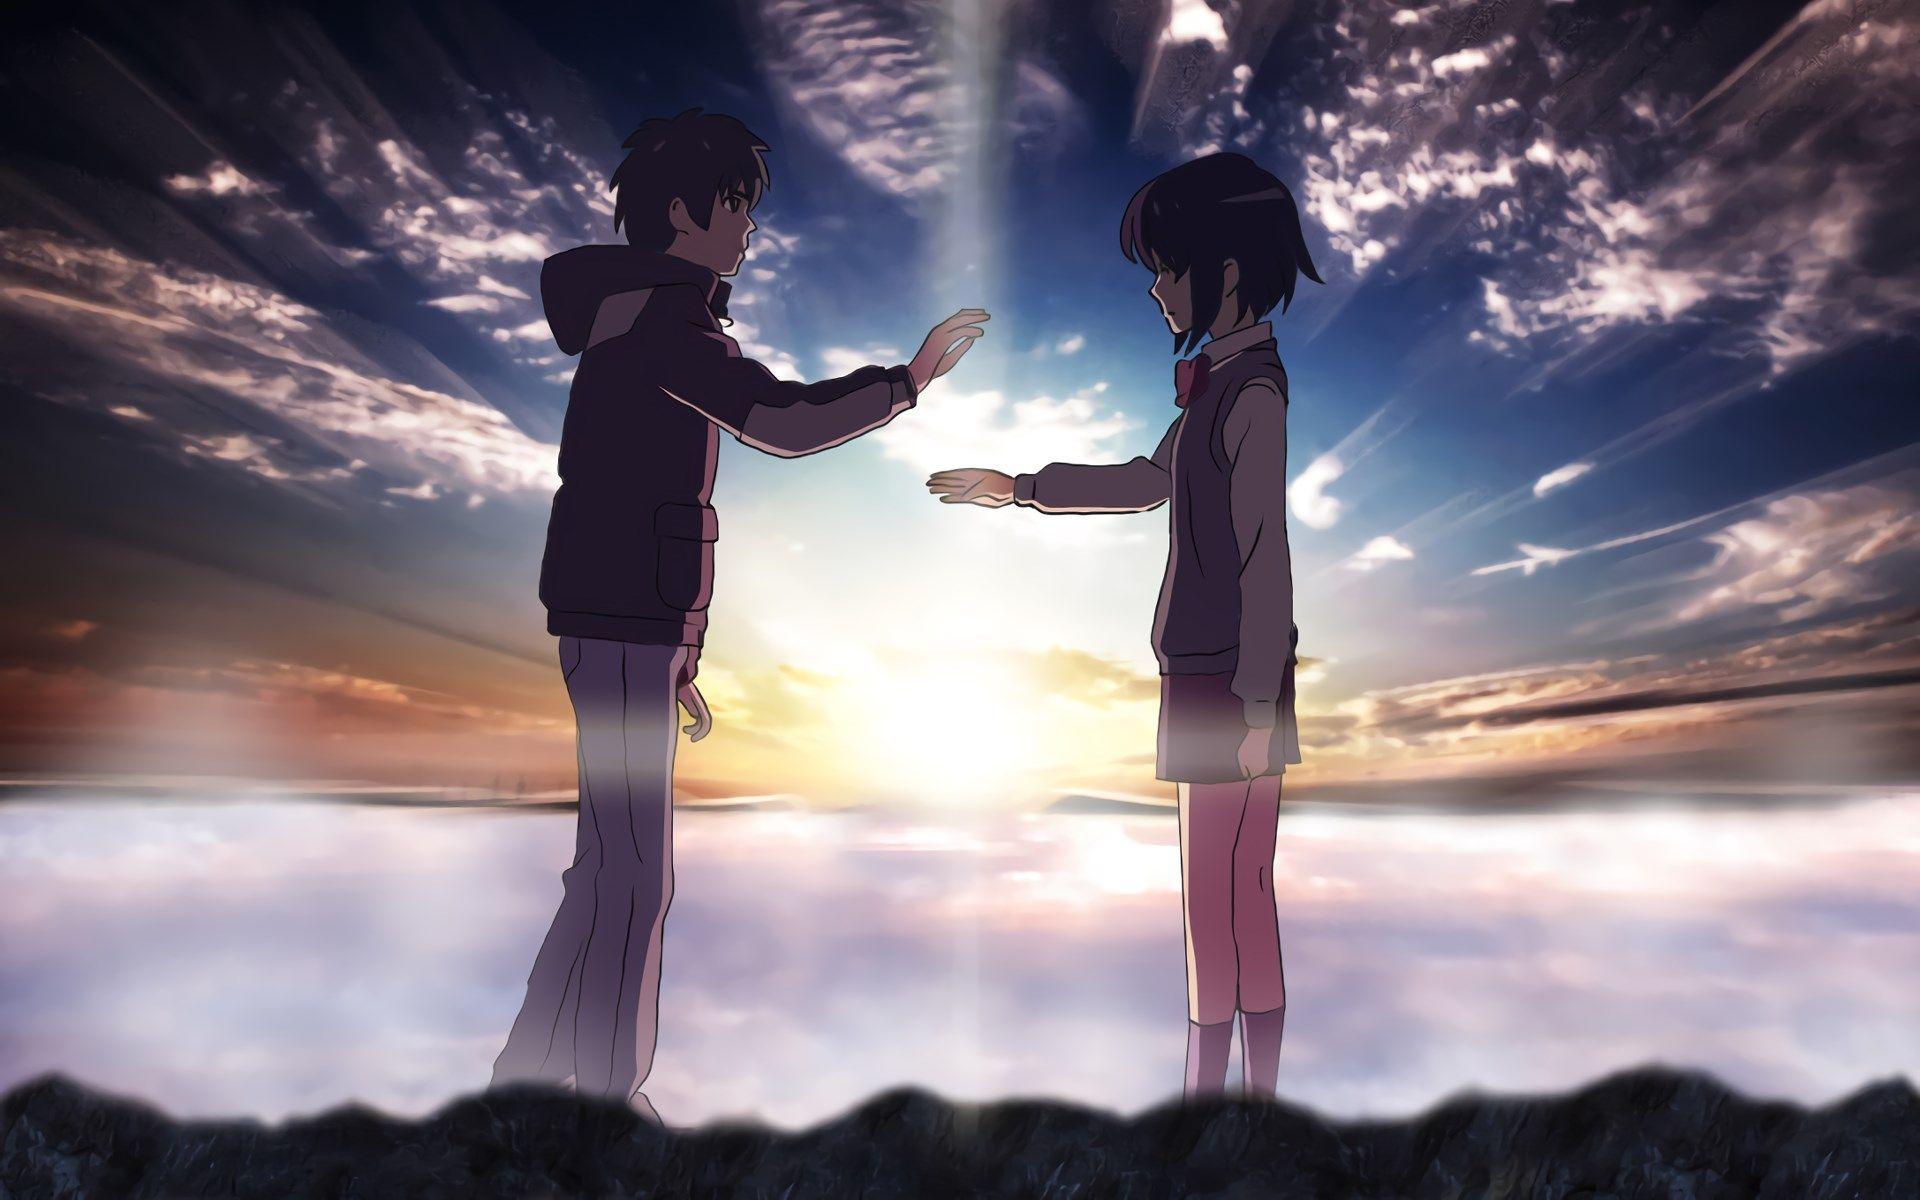 Your Name Wallpapers - Top Free Your Name Backgrounds - WallpaperAccess